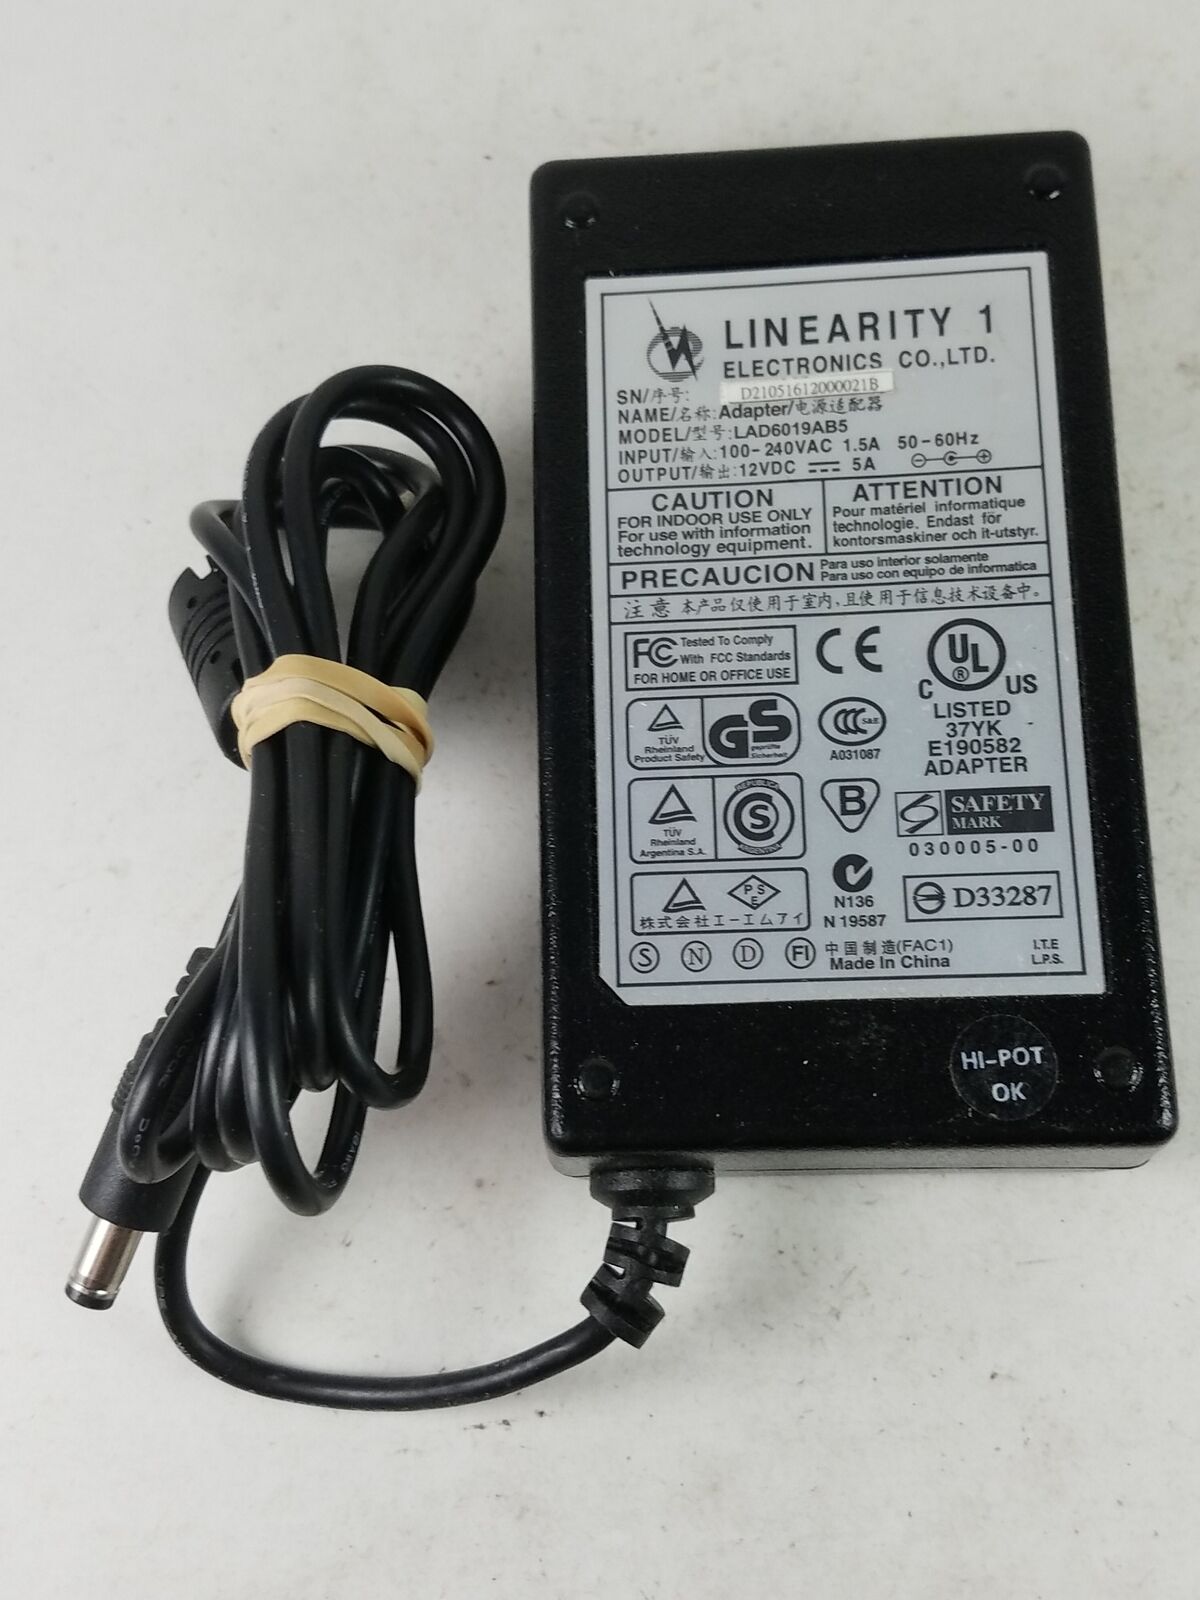 LINEARITY LAD6019AB5 AC ADAPTER 12VDC 5A Used 2.5 x 5.4 x 10.2 m